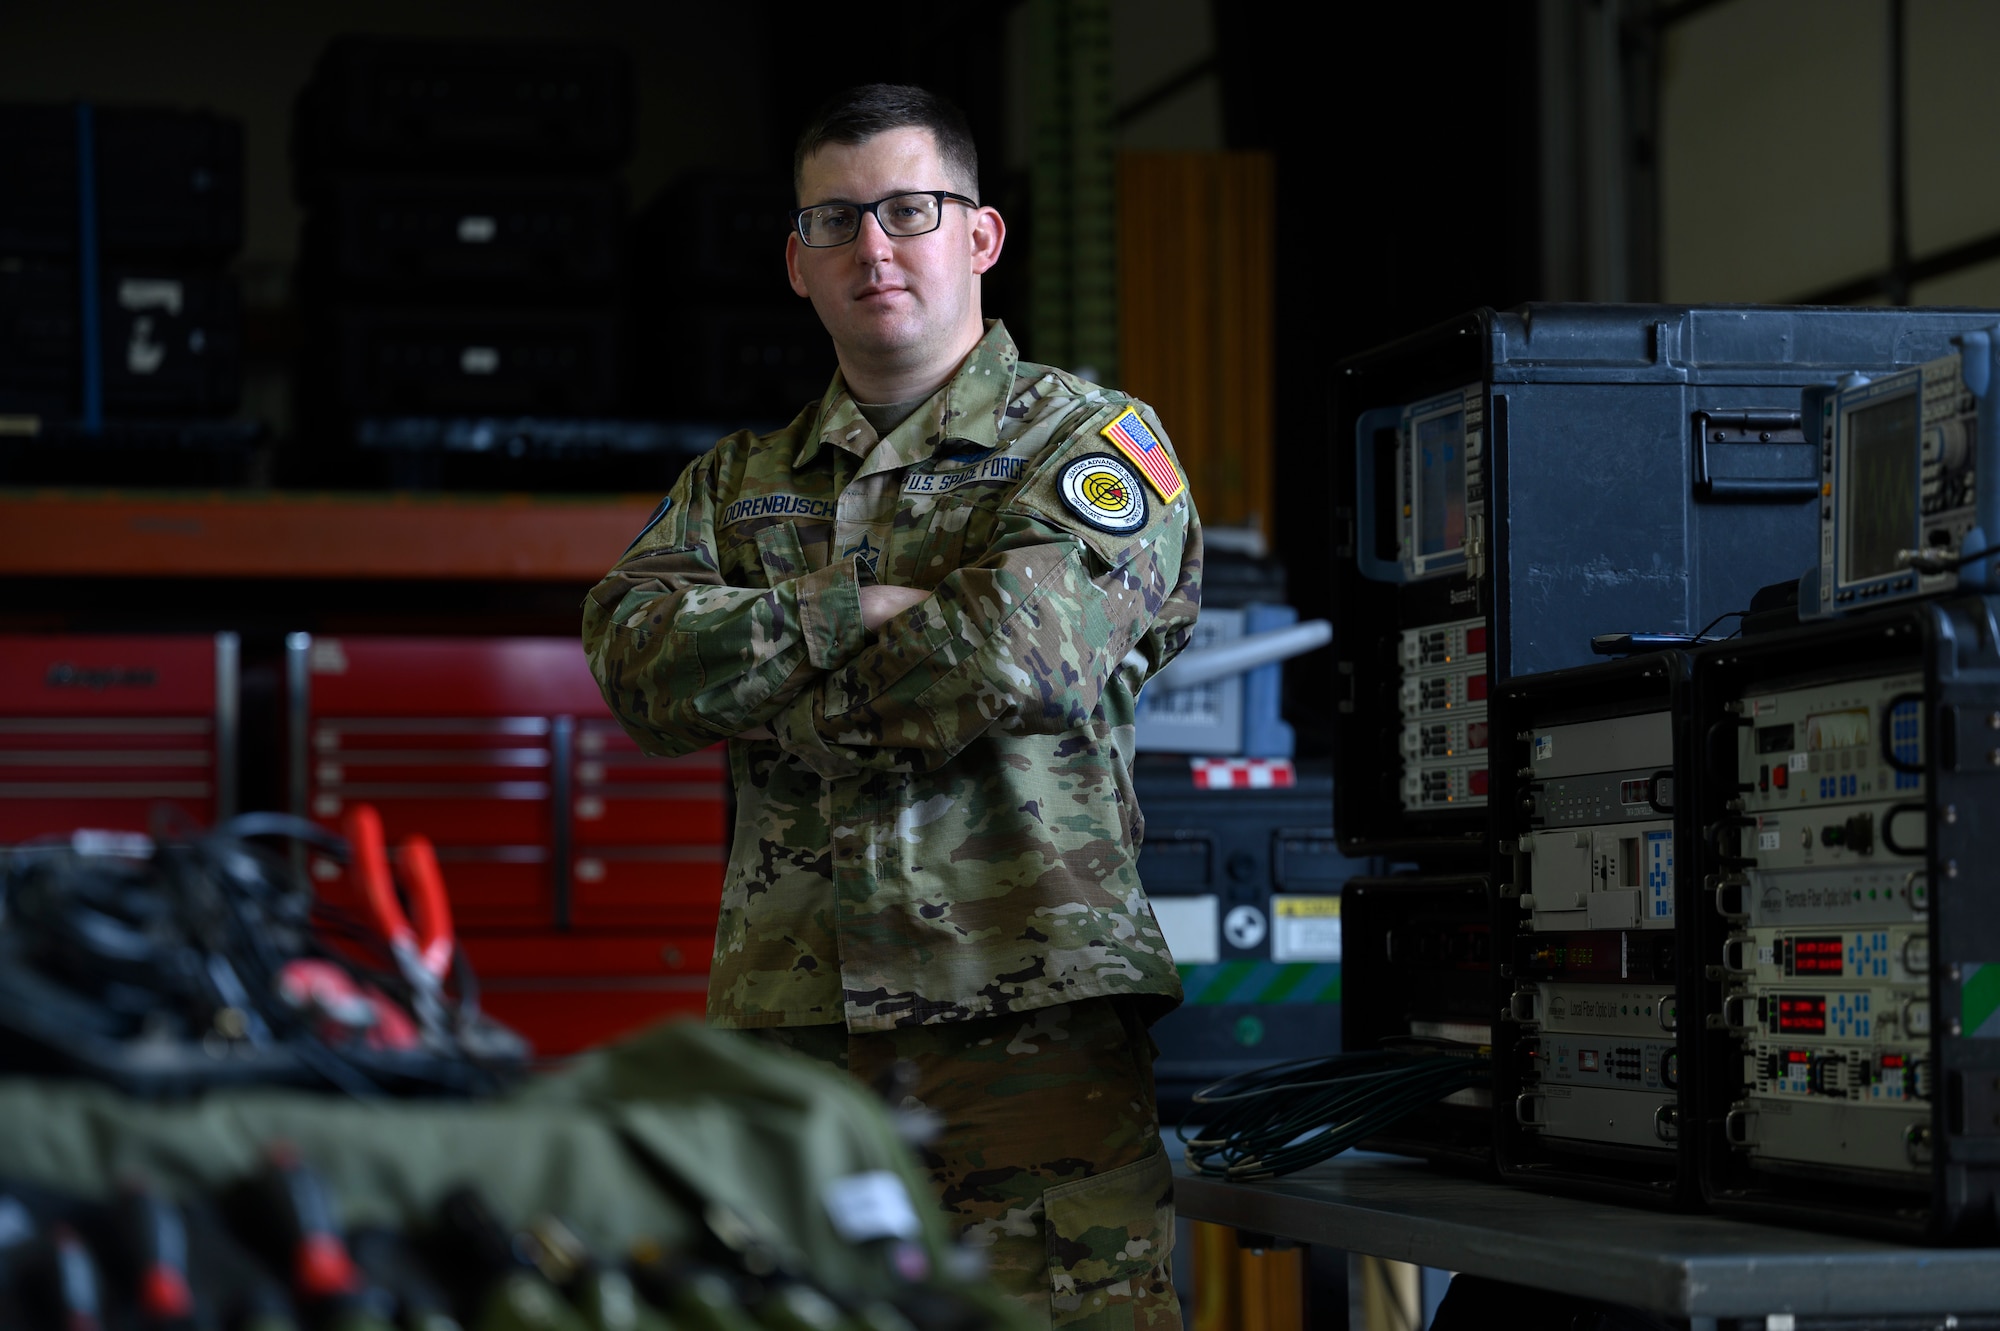 U.S. Space Force Master Sgt. Lane Dorenbusch, 527th Space Aggressor Squadron flight chief of weapons and tactics, poses for a portrait among training equipment inside the “Aggressor Barn” at Schriever Space Force Base, Colorado, April 7, 2023. The “Aggressor Barn” is a warehouse used to store and train on equipment, as well as a location to execute missions. Capable of operating from the “Barn” or in field training environments, Dorenbusch and his crew deploy adversary tactics to disrupt the satellite communications signals of friendly forces in order to prepare them for real-world threats. (U.S. Space Force photo by Paul Honnick)